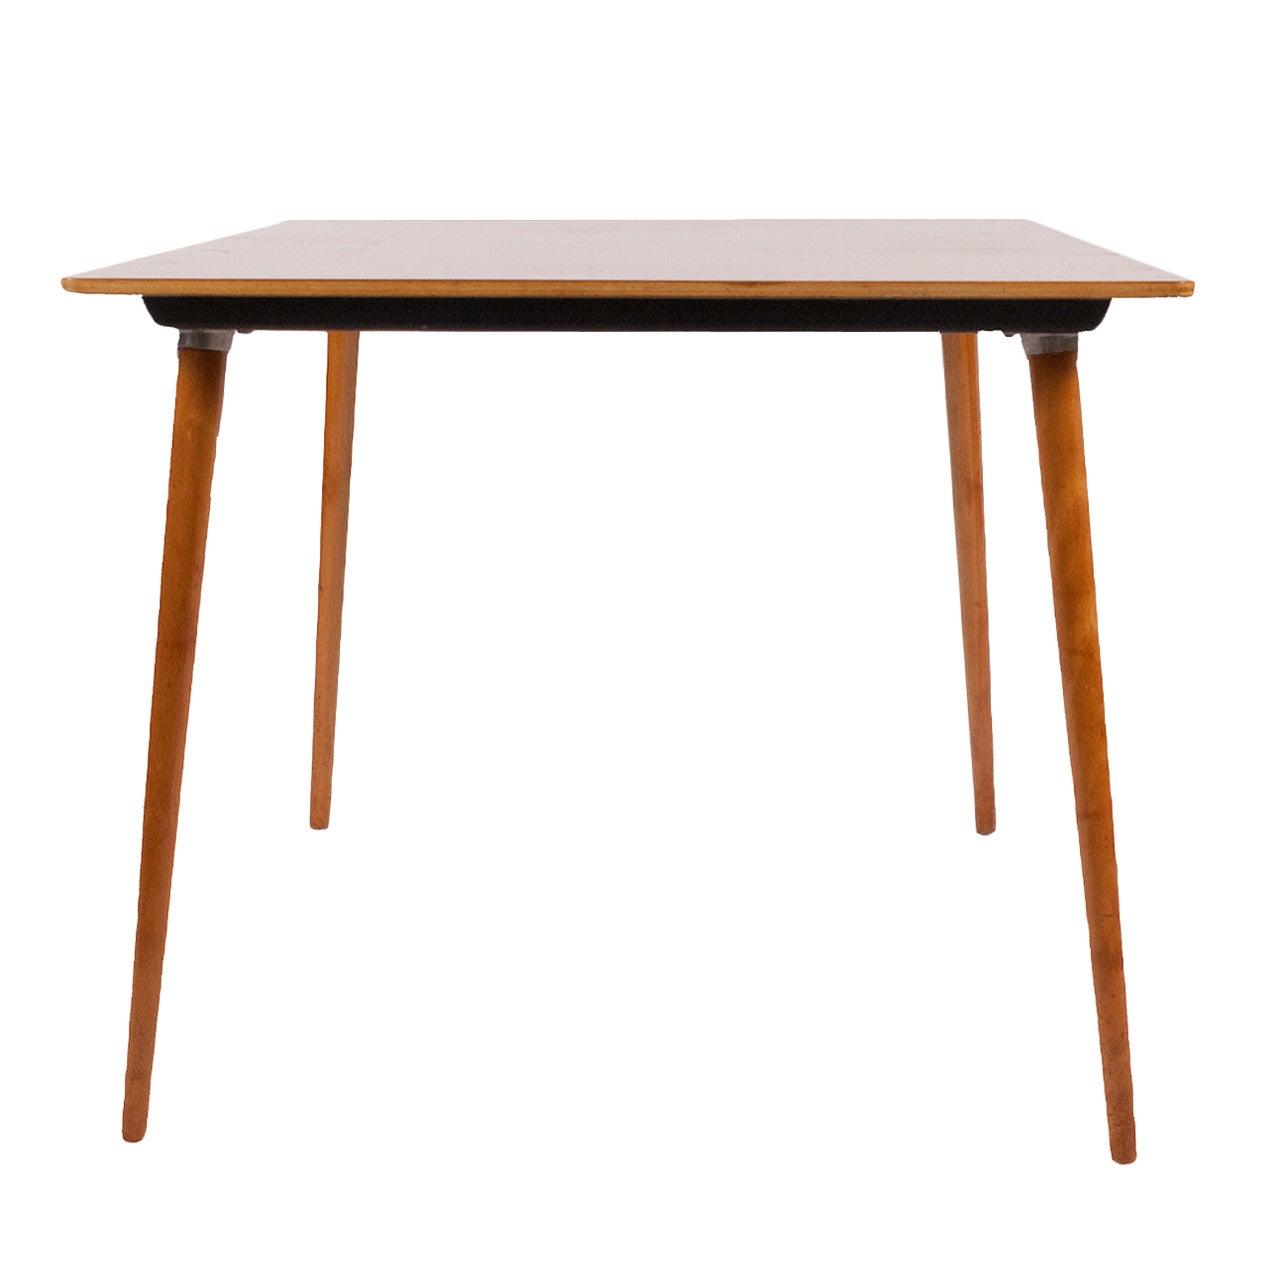 DTW-40 Dowel Leg Card Table by Charles Eames